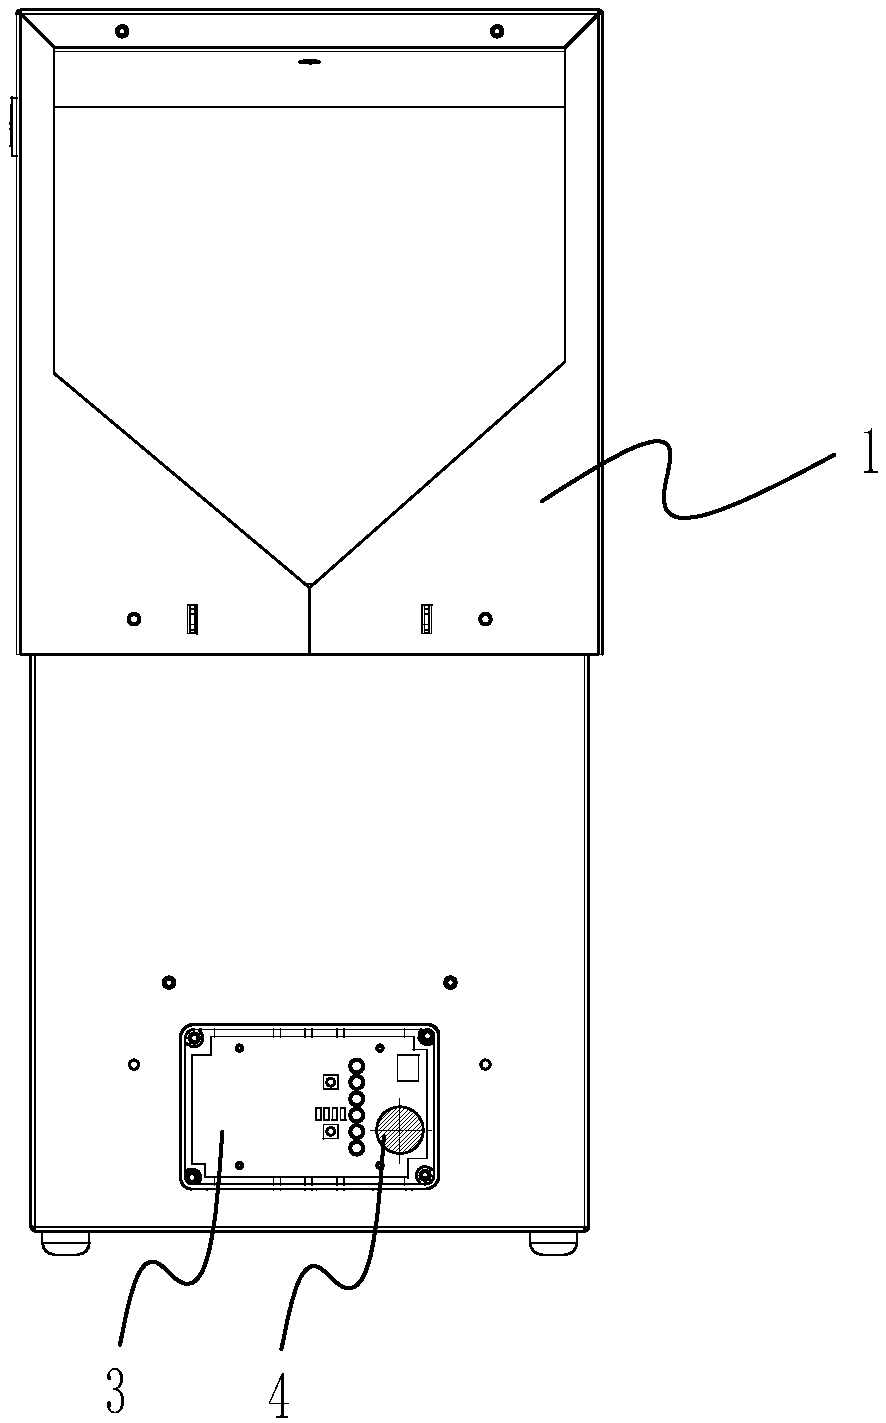 Carbon dioxide generation device with low-oxygen protection